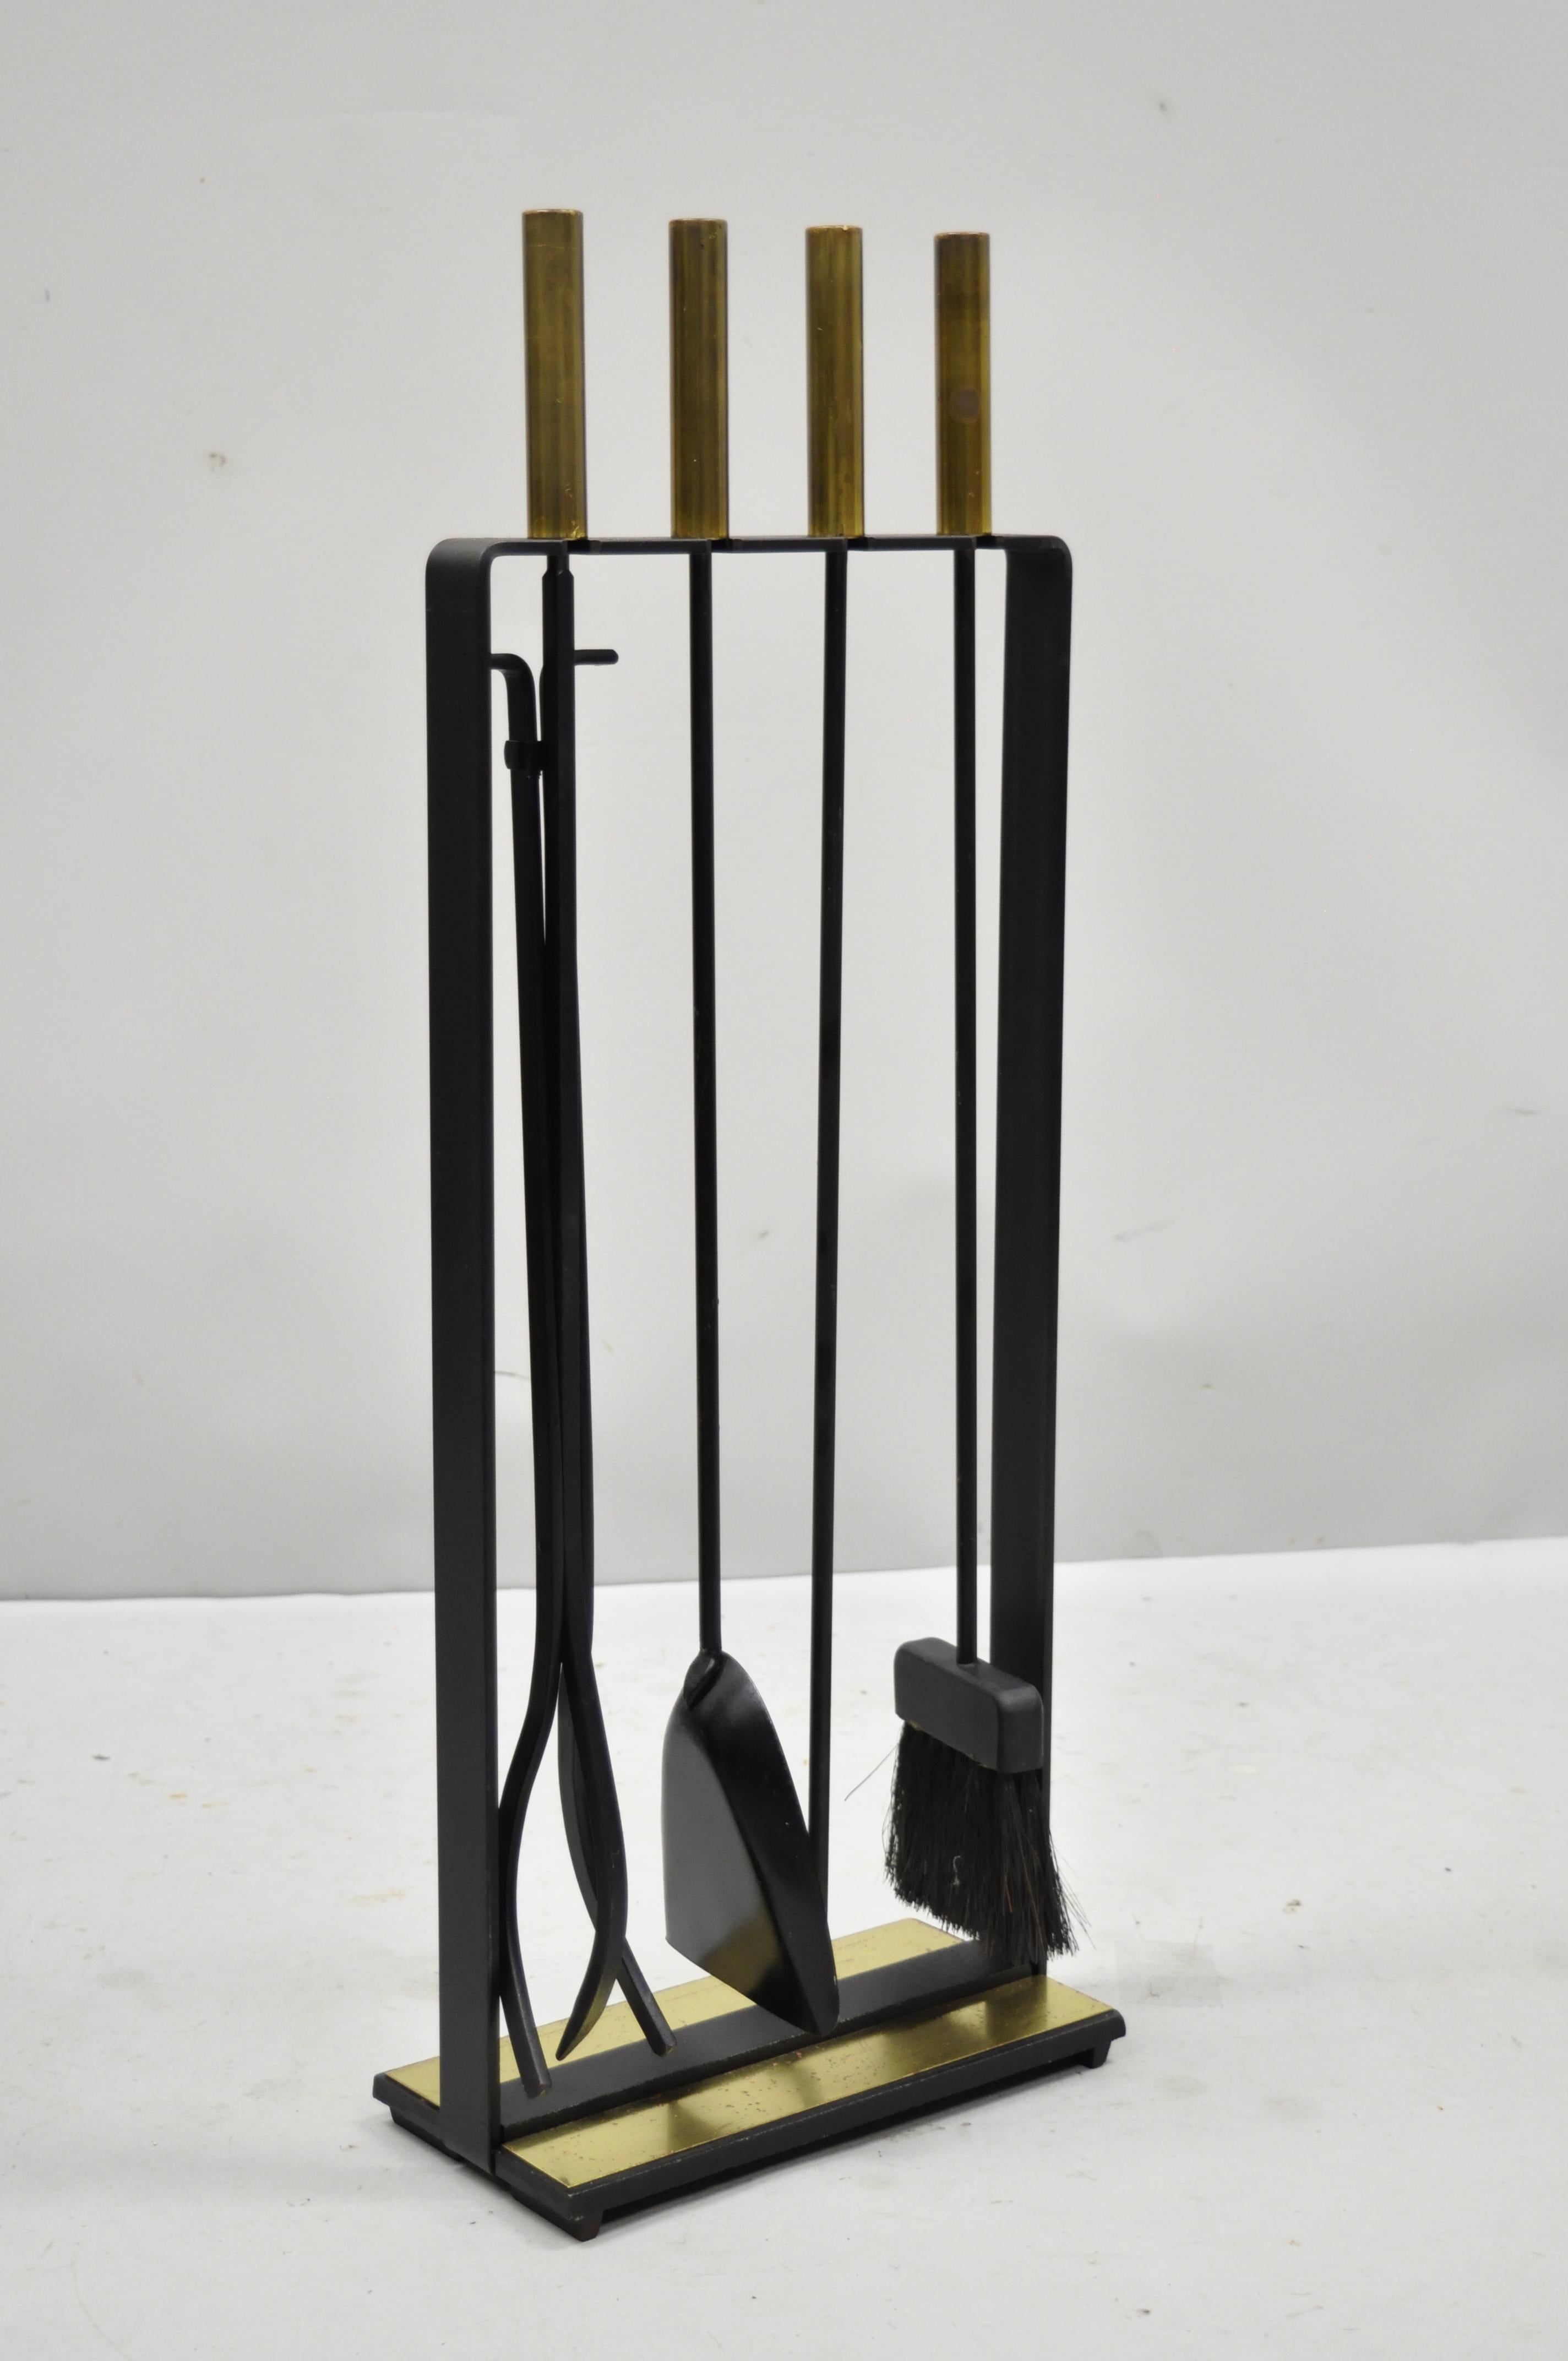 Mid-Century Modern cast iron and brass Minimalist fireplace tool set with stand by Pilgrim. Item features cast iron frame and stand, brass handles and accents, original stamp, very nice vintage item, clean modernist lines, quality American